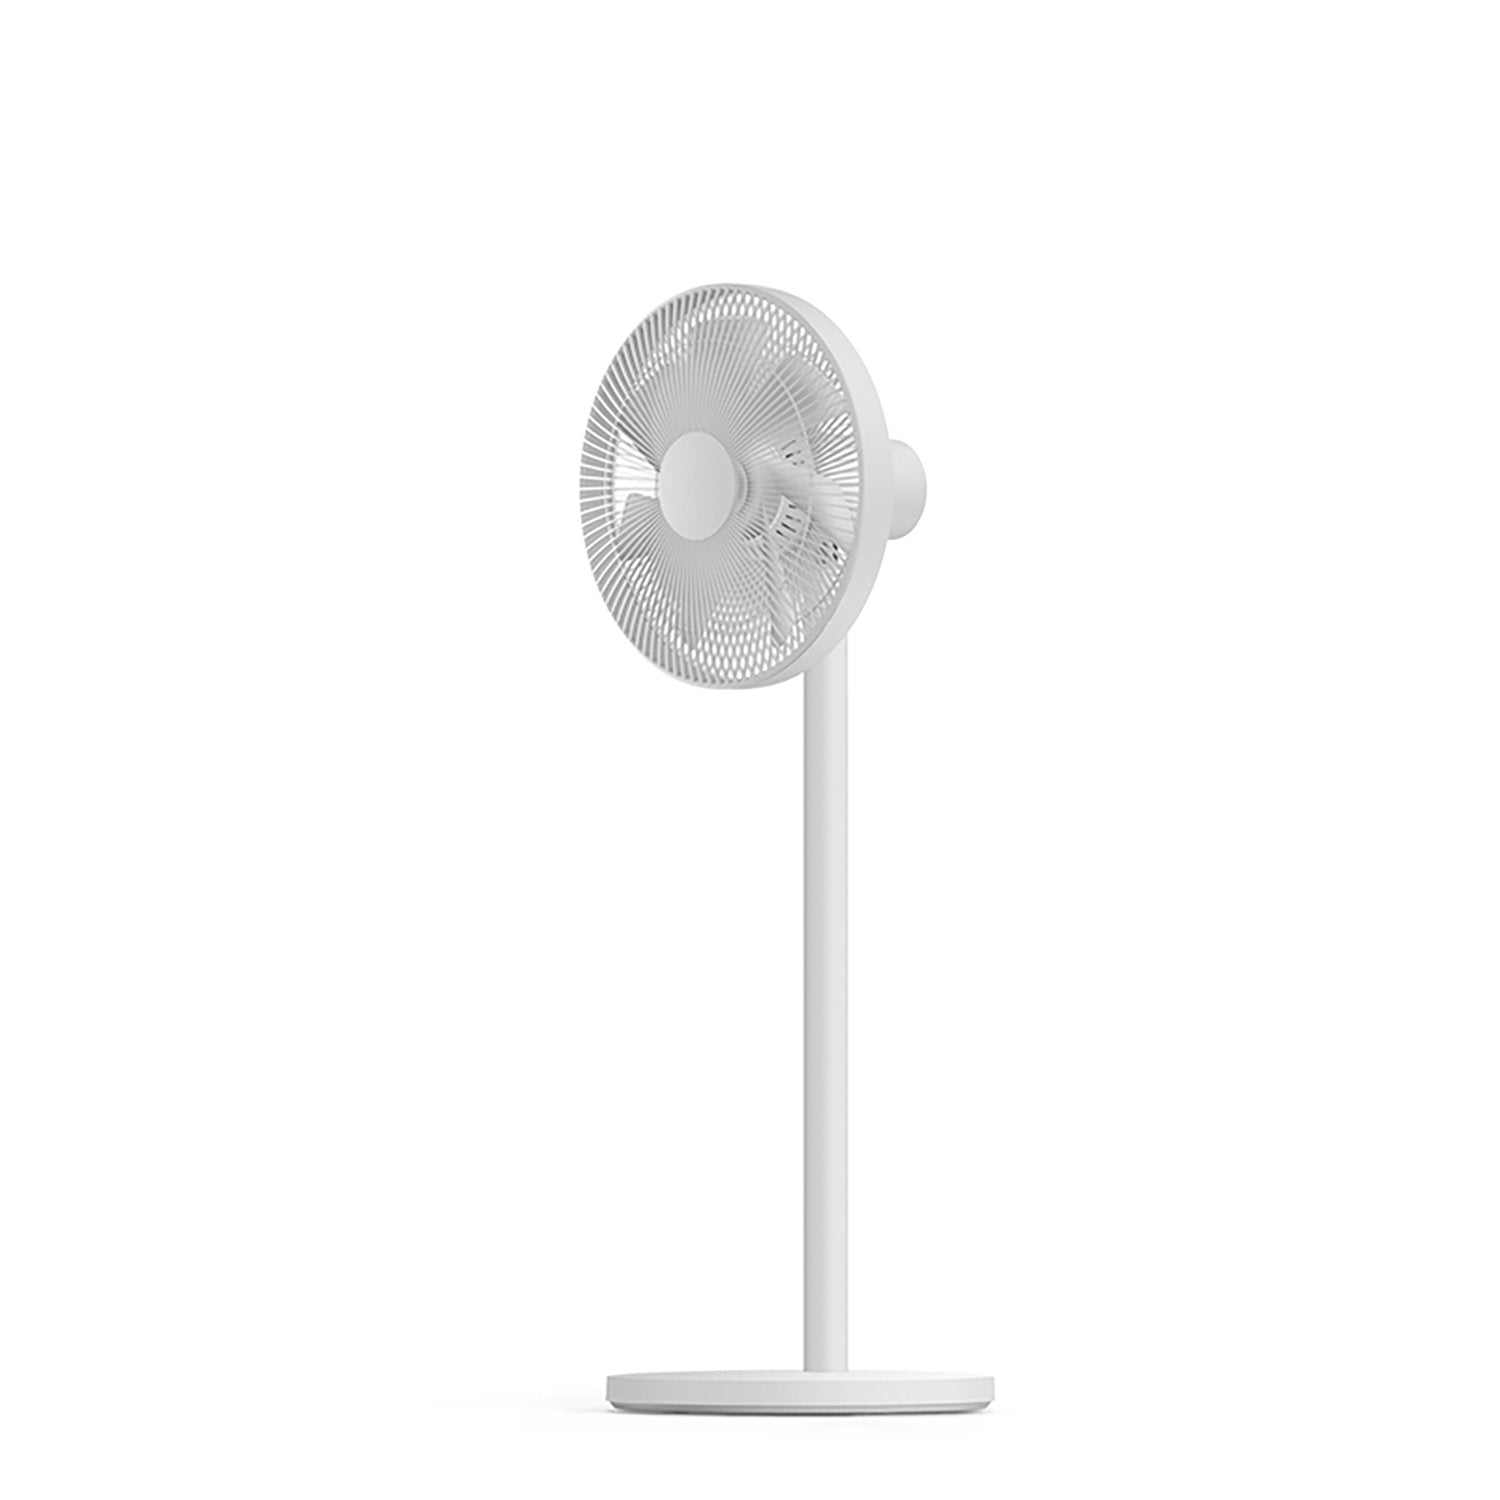 Xiaomi Mijia 1X Wired Portable Home Cooler House Standing Fan Natural Wind With WiFi APP Control, White Default Xiaomi 